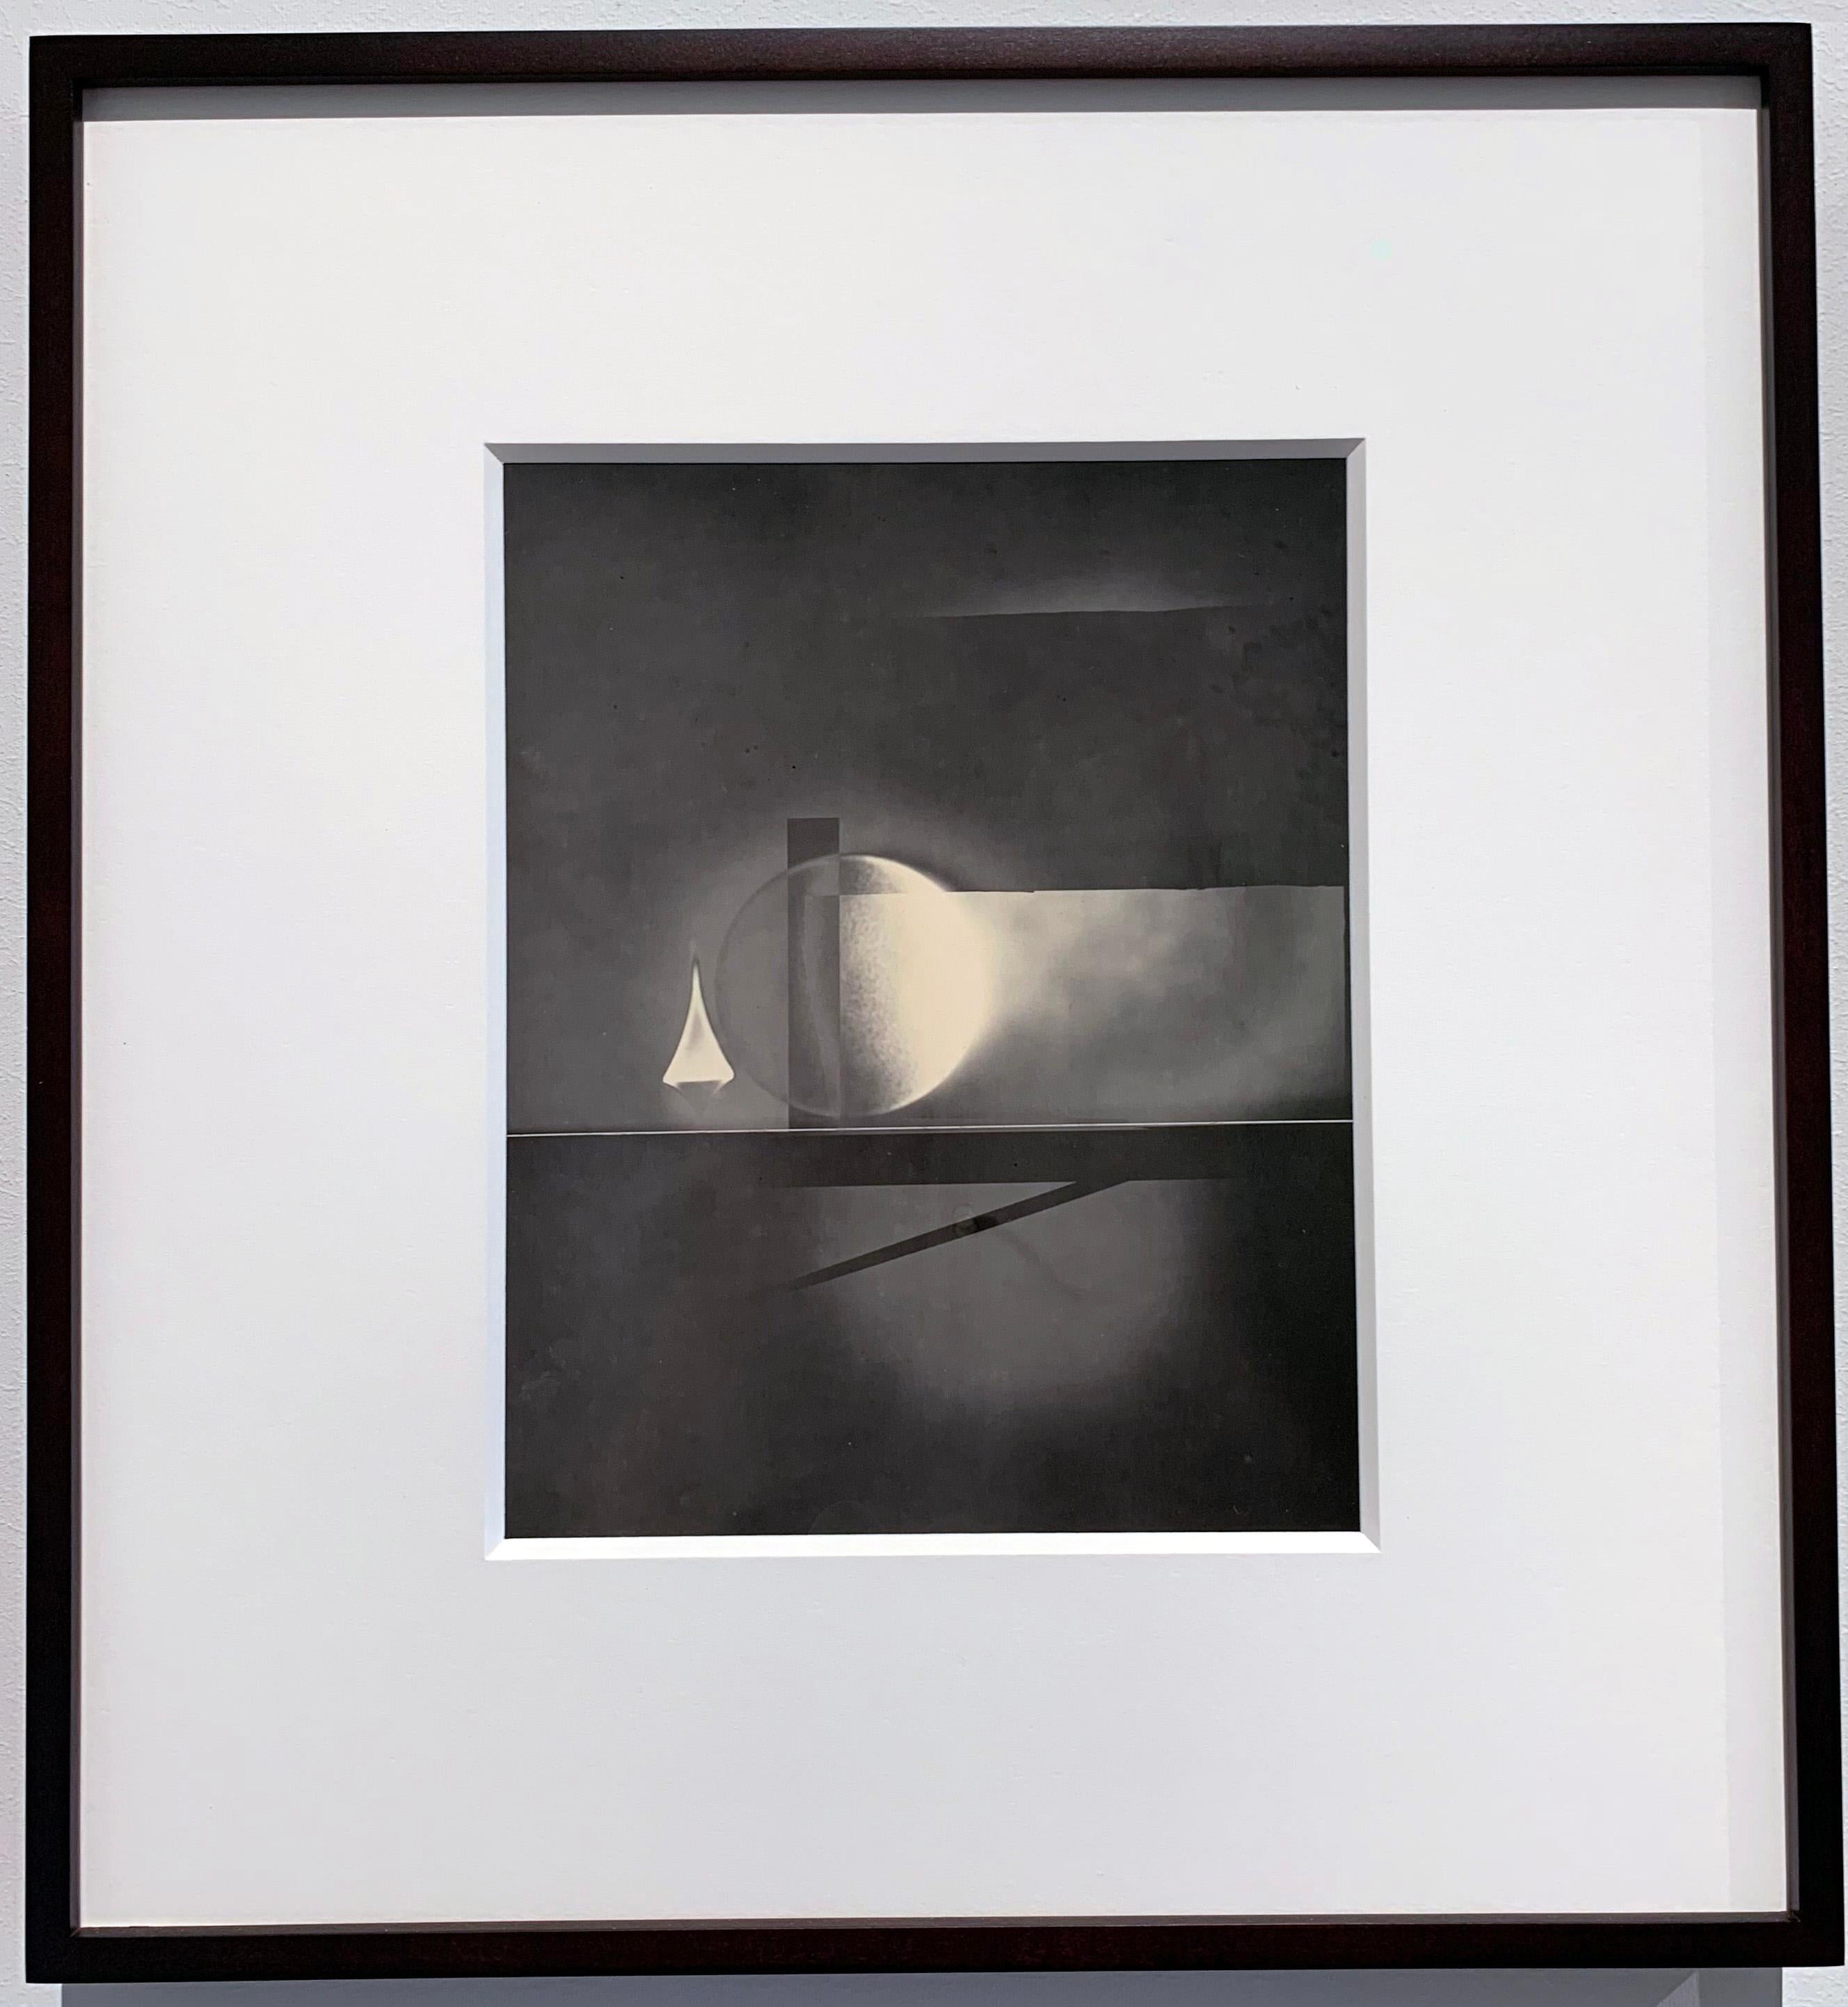 ATO>MIC #10, Unique Silver Luminogram Print, Abstract geometry in warm tones - Photograph by Michael G Jackson